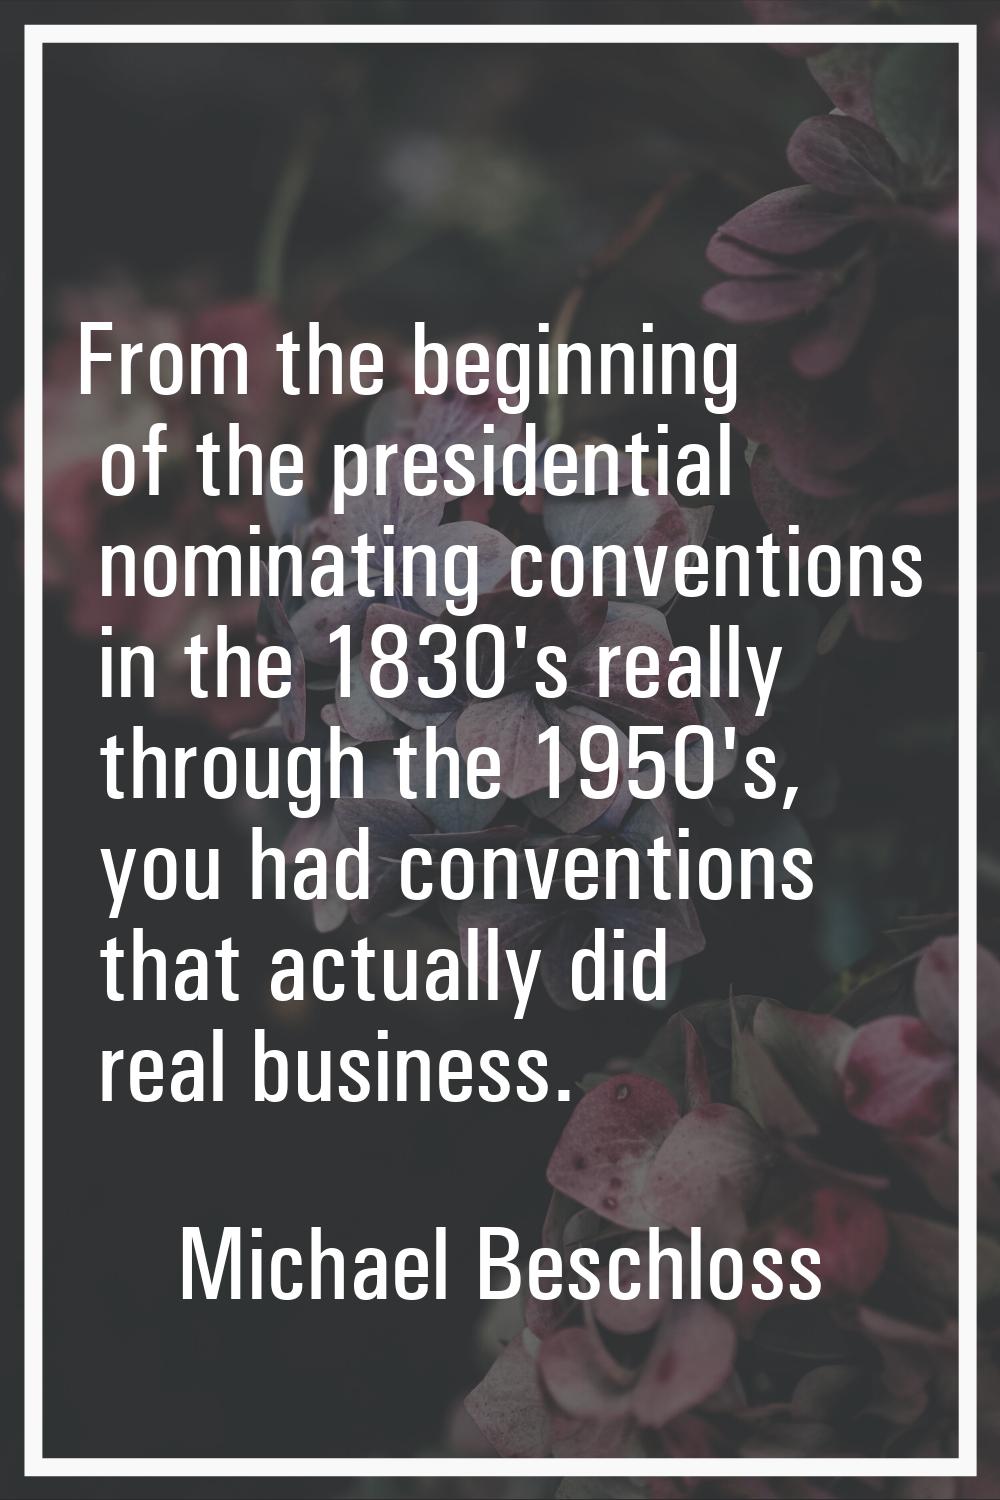 From the beginning of the presidential nominating conventions in the 1830's really through the 1950